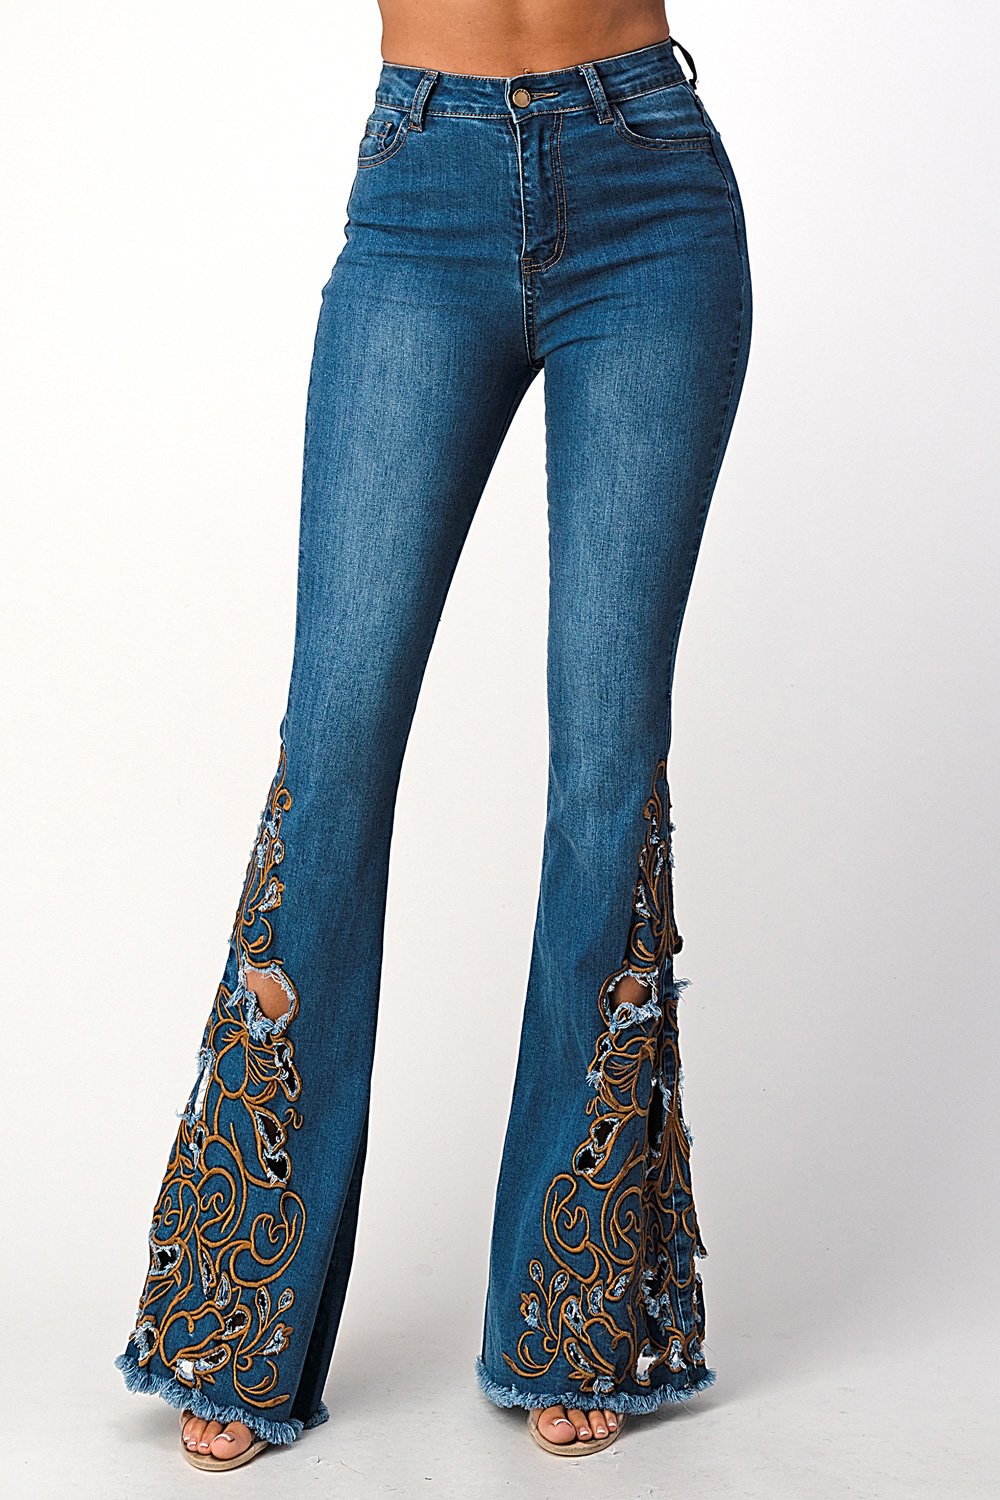 Purple Candy Jeans Women Embroidery Ripped High Rise Flare Fit Denim Pants (Medium Blue)